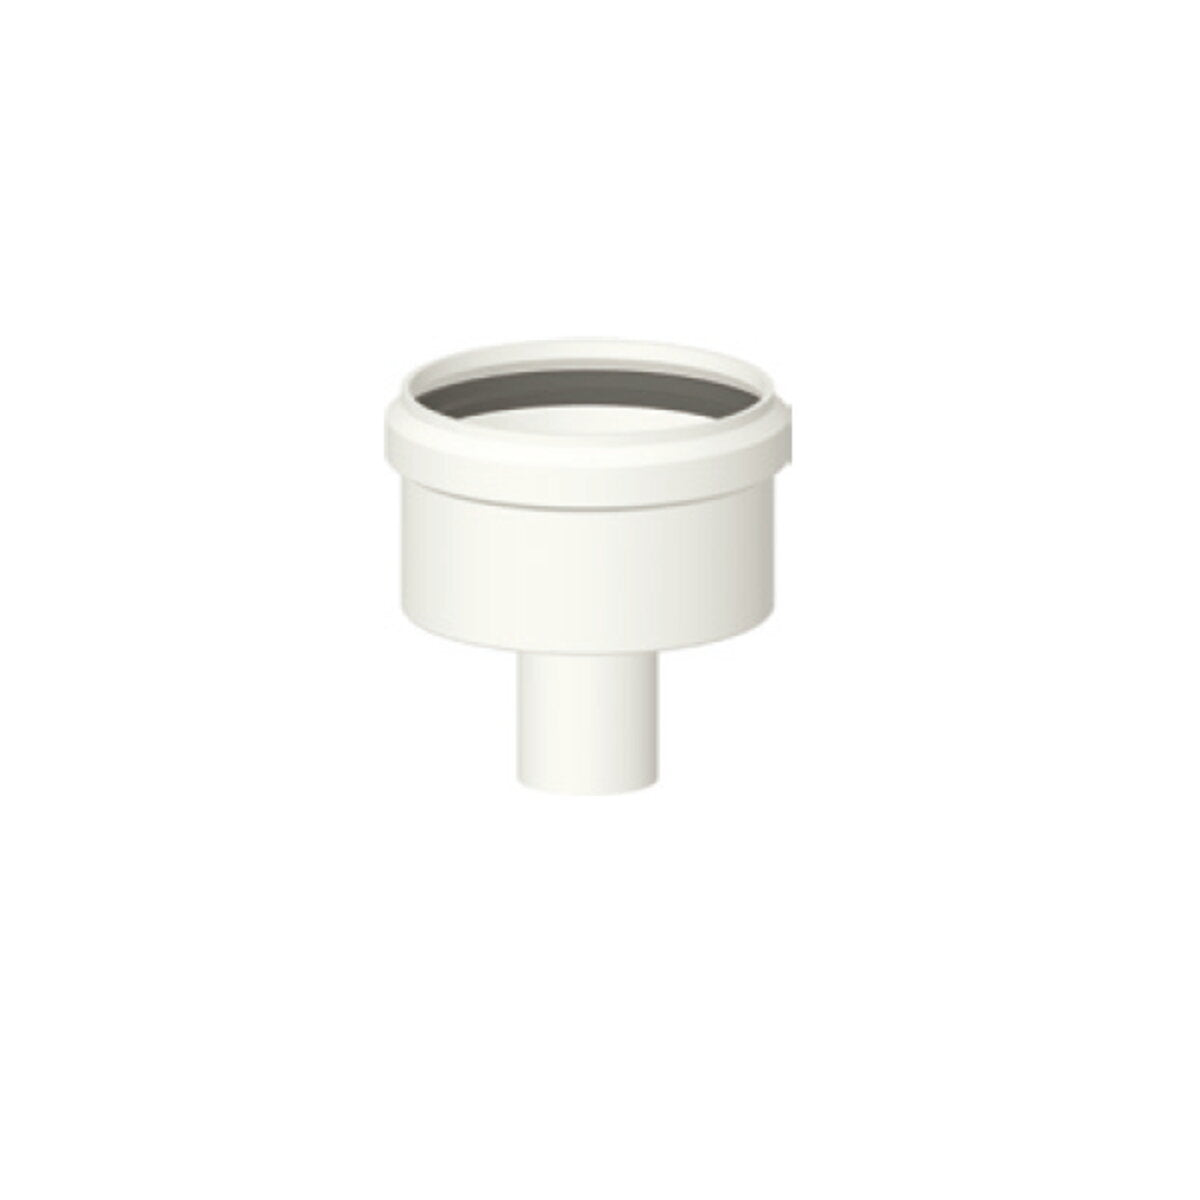 Condensate drain plug for condensing boiler fume outlet diam. 80mm. in pp